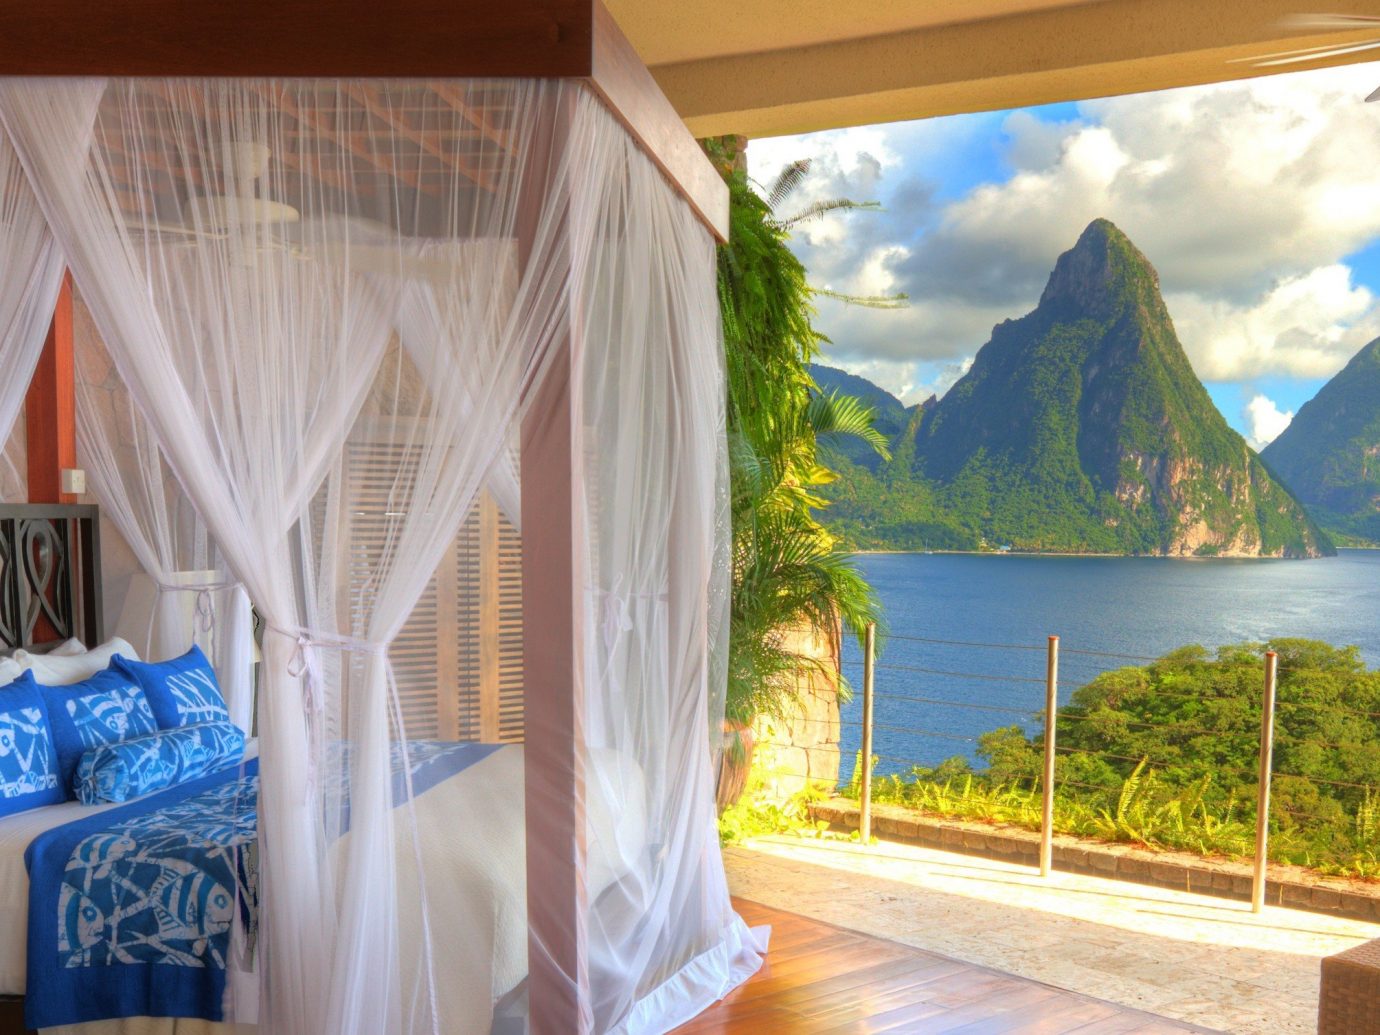 Bedroom with a view at Jade Mountain Resort, St. Lucia, Caribbean